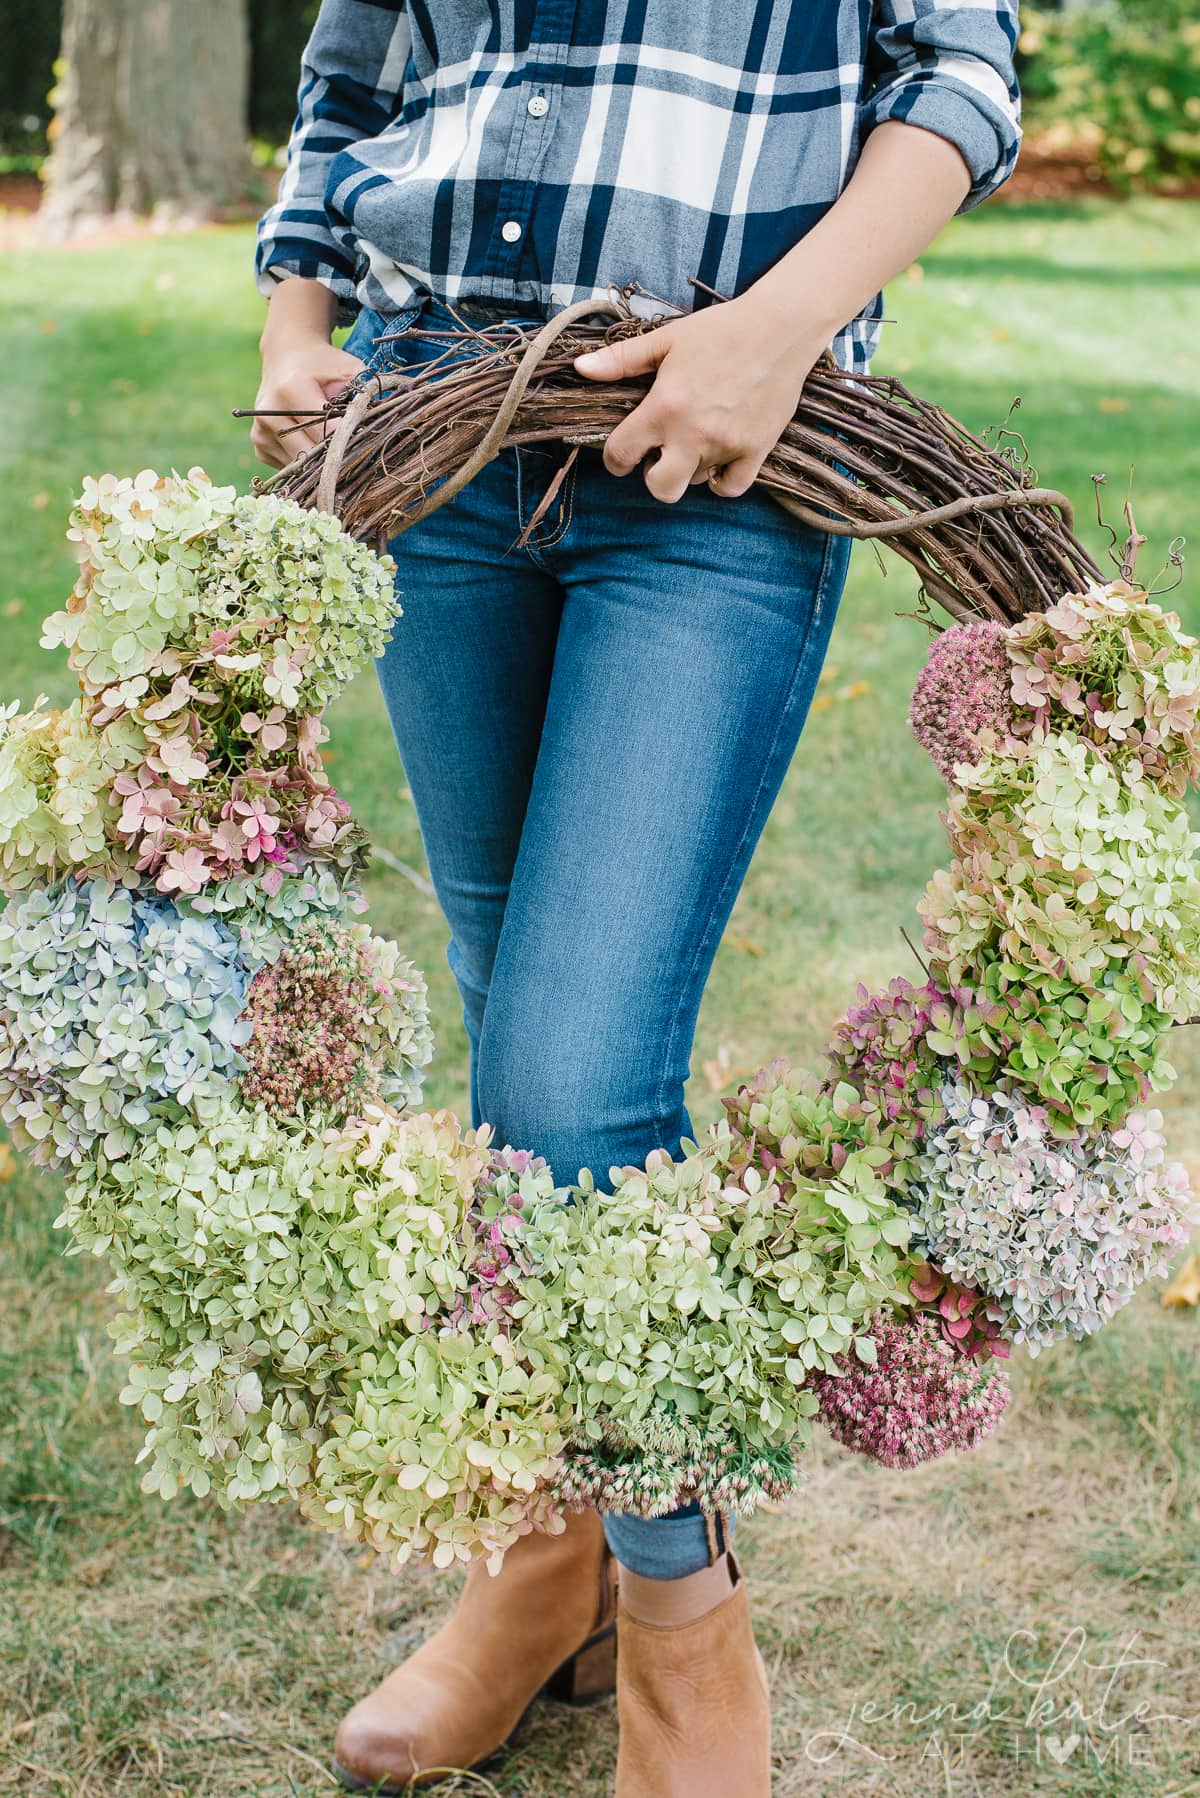 A person is standing in the grass holding a homemade hydrangea wreath